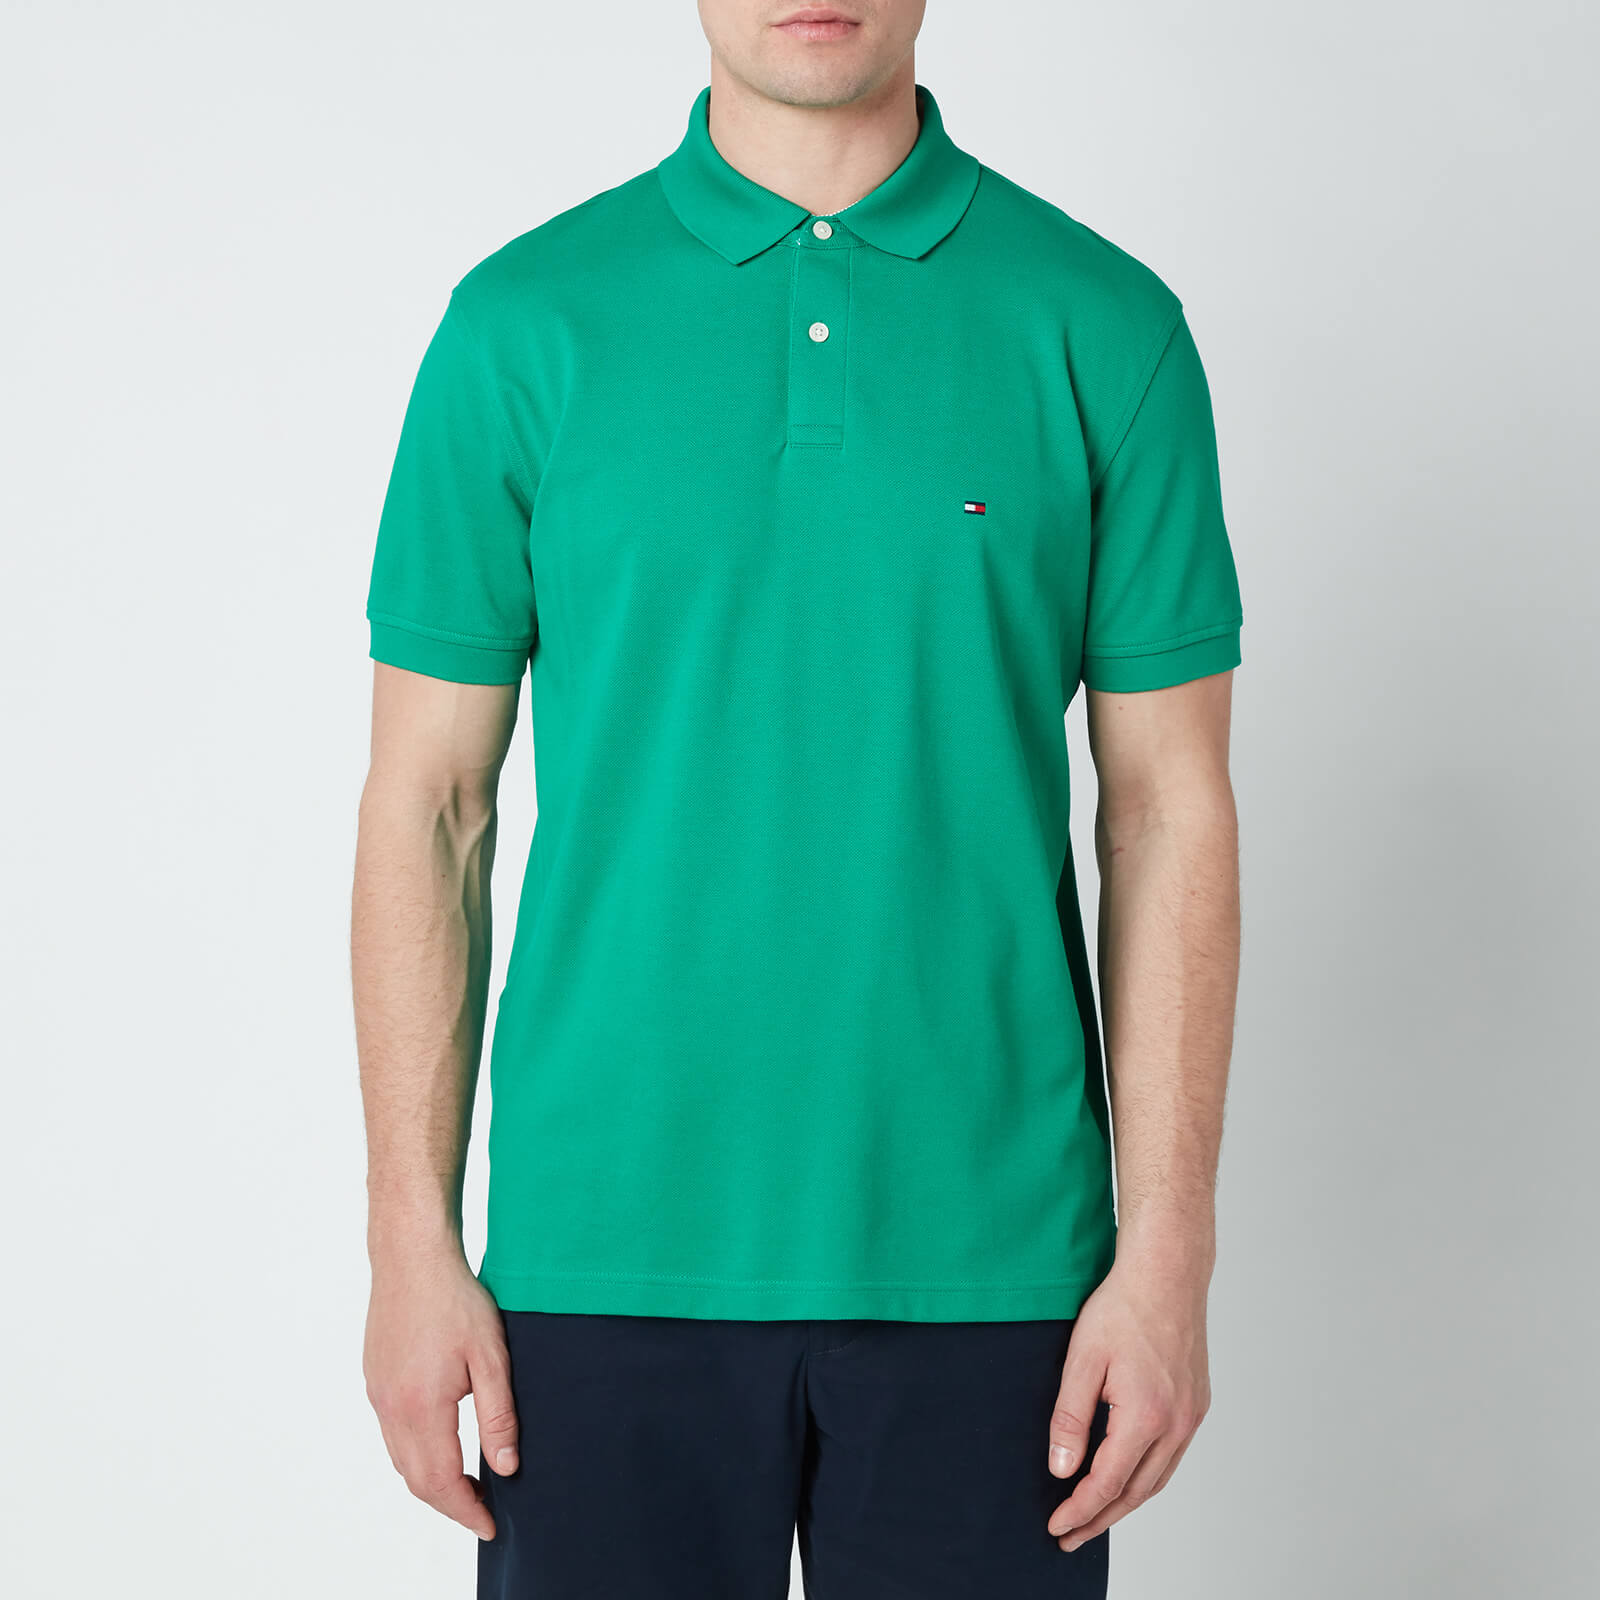 Tommy Hilfiger Men's 1985 Regular Fit Polo Shirt - Courtside Green - S